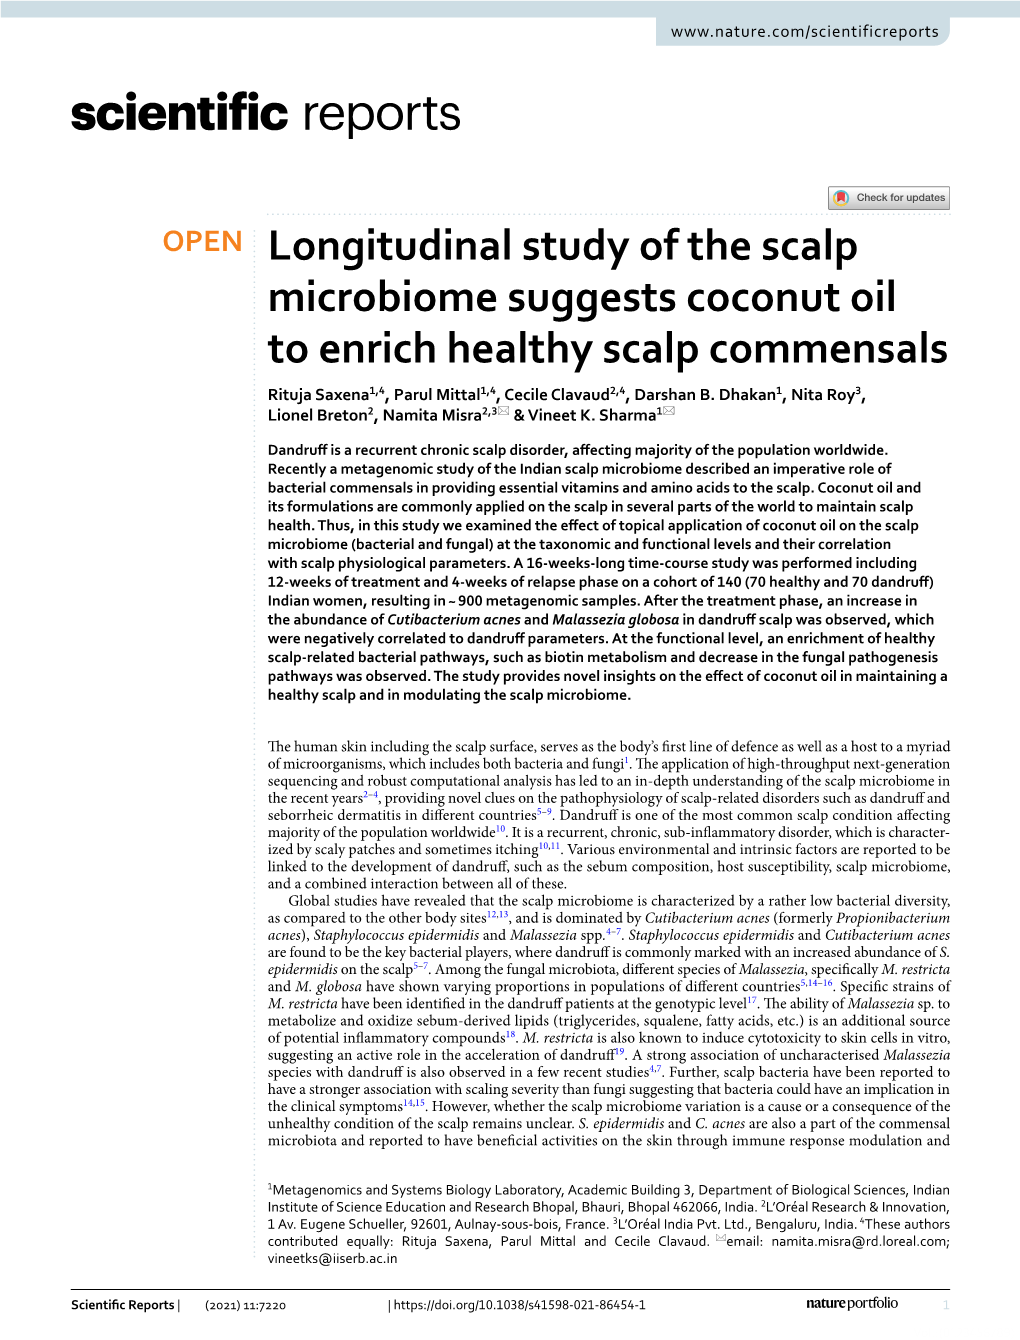 Longitudinal Study of the Scalp Microbiome Suggests Coconut Oil to Enrich Healthy Scalp Commensals Rituja Saxena1,4, Parul Mittal1,4, Cecile Clavaud2,4, Darshan B